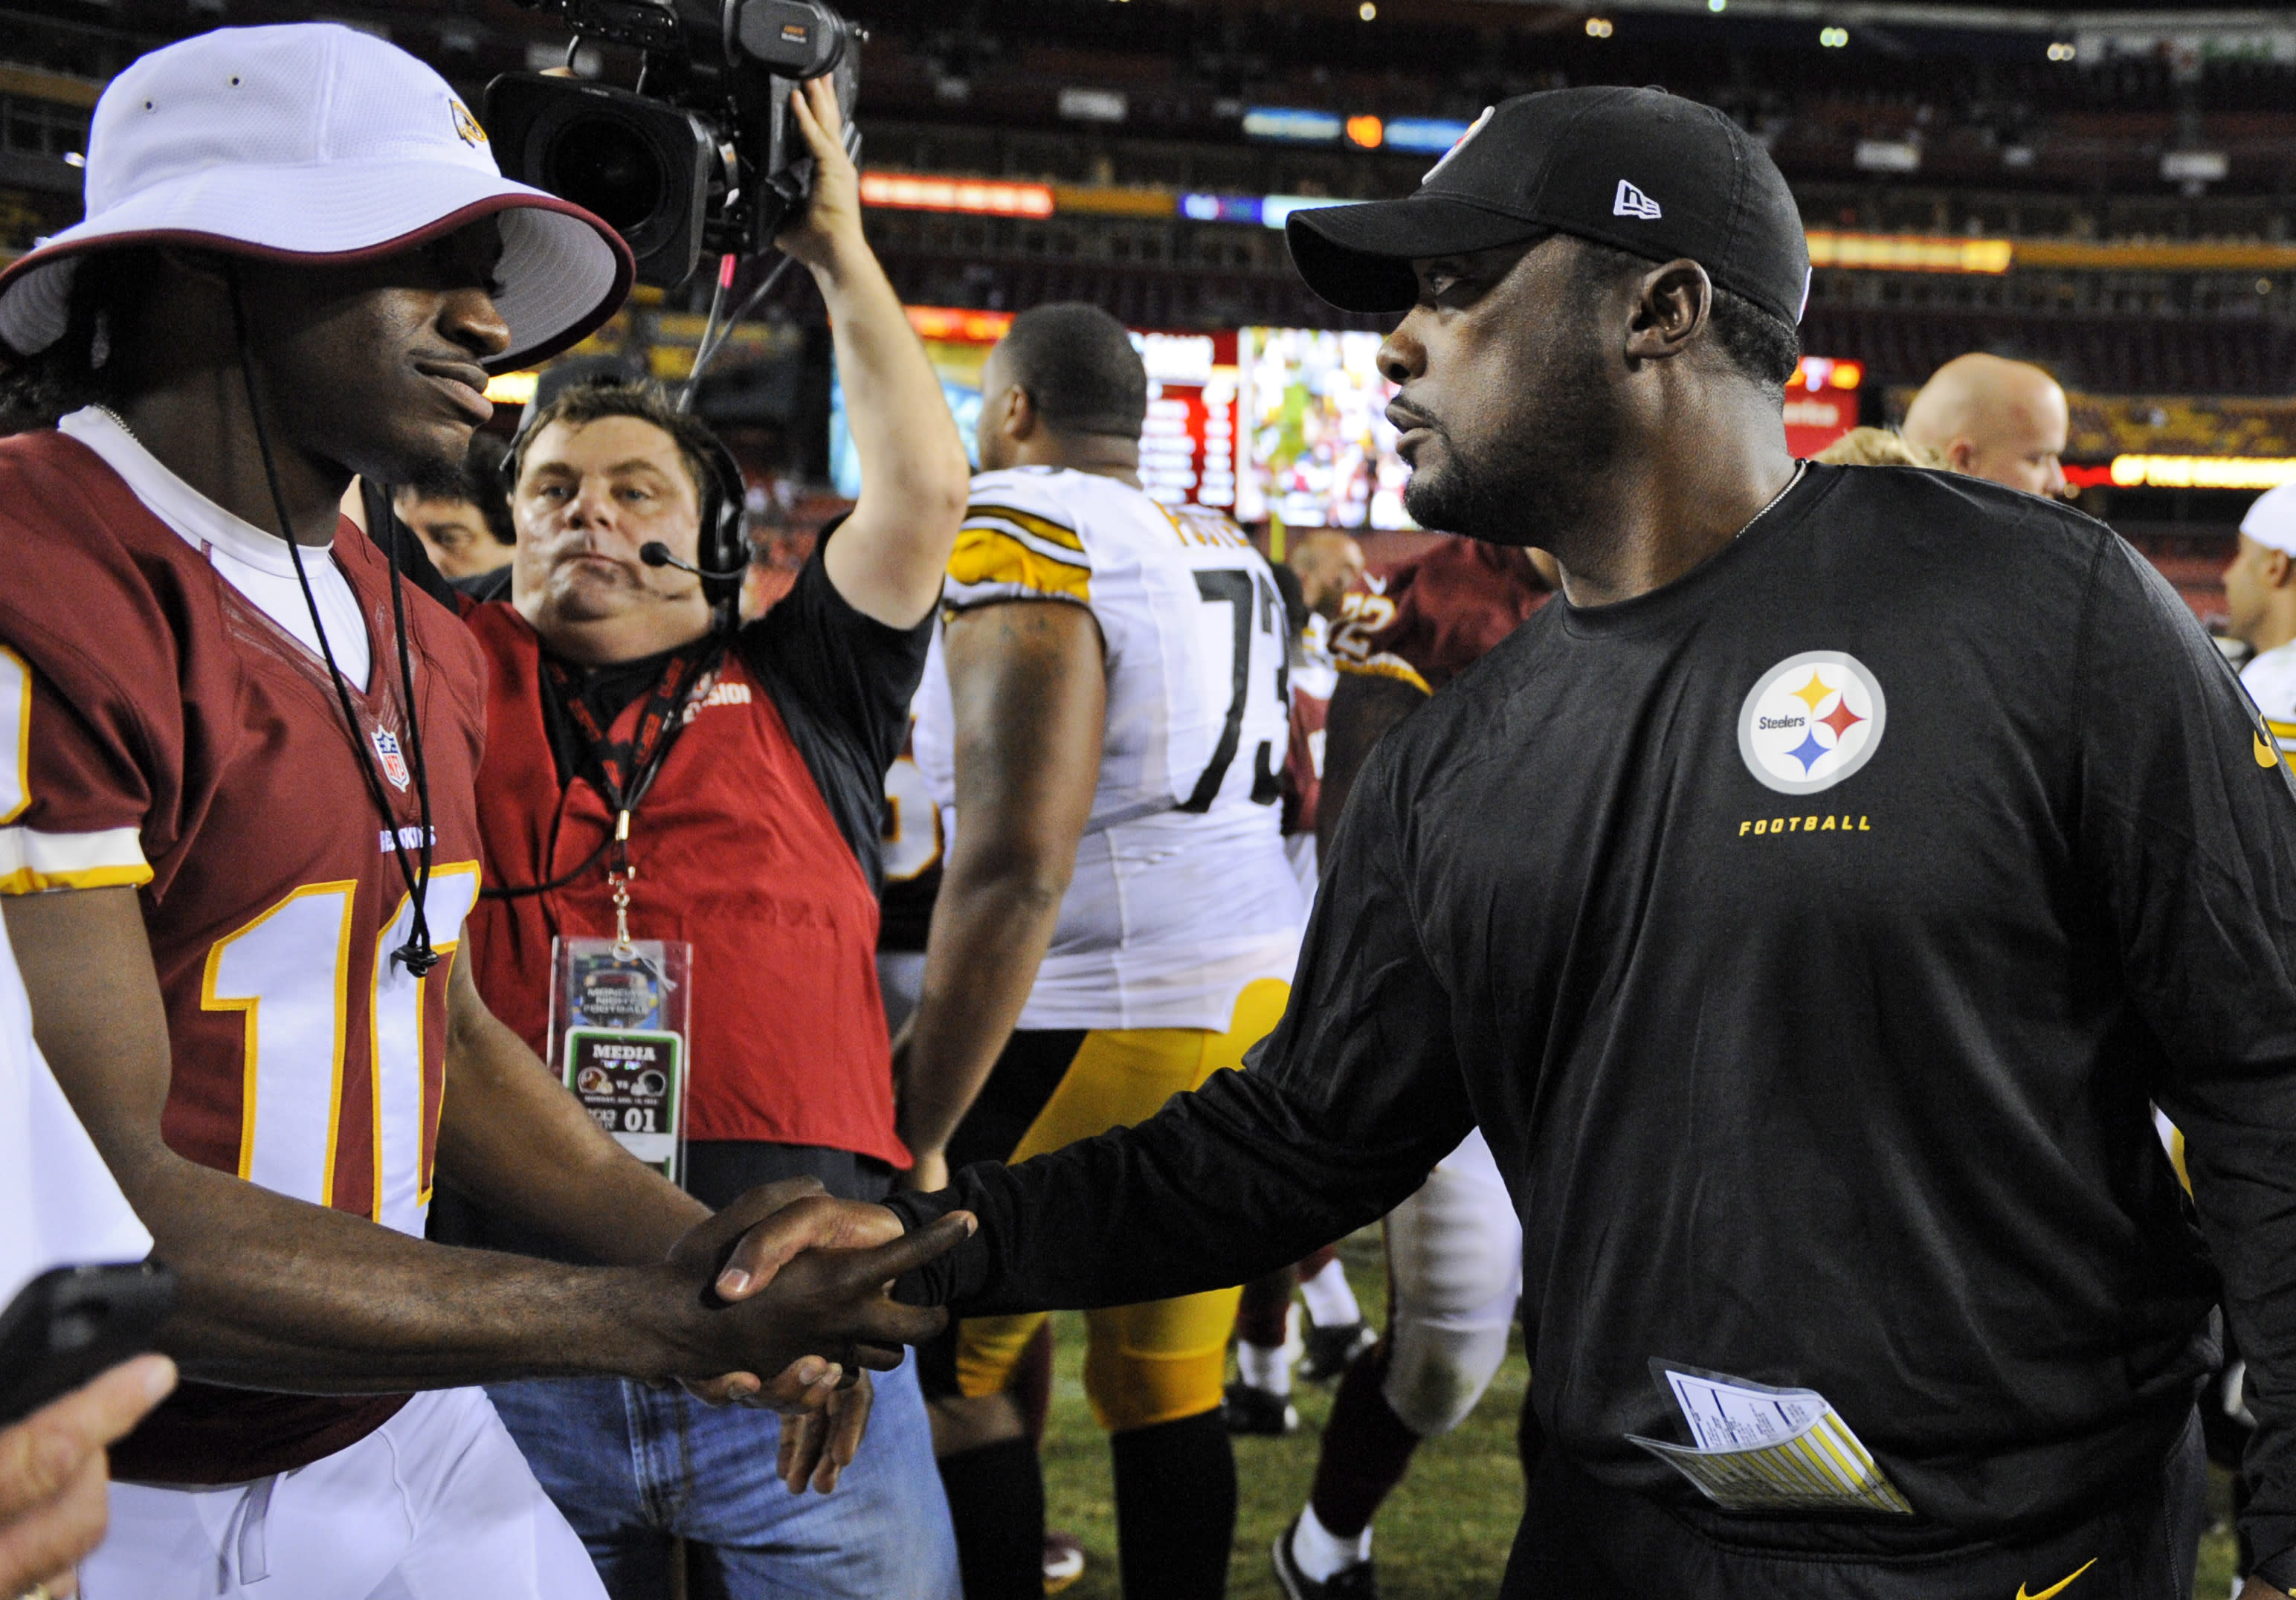 5 things we learned from Steelers-Redskins game